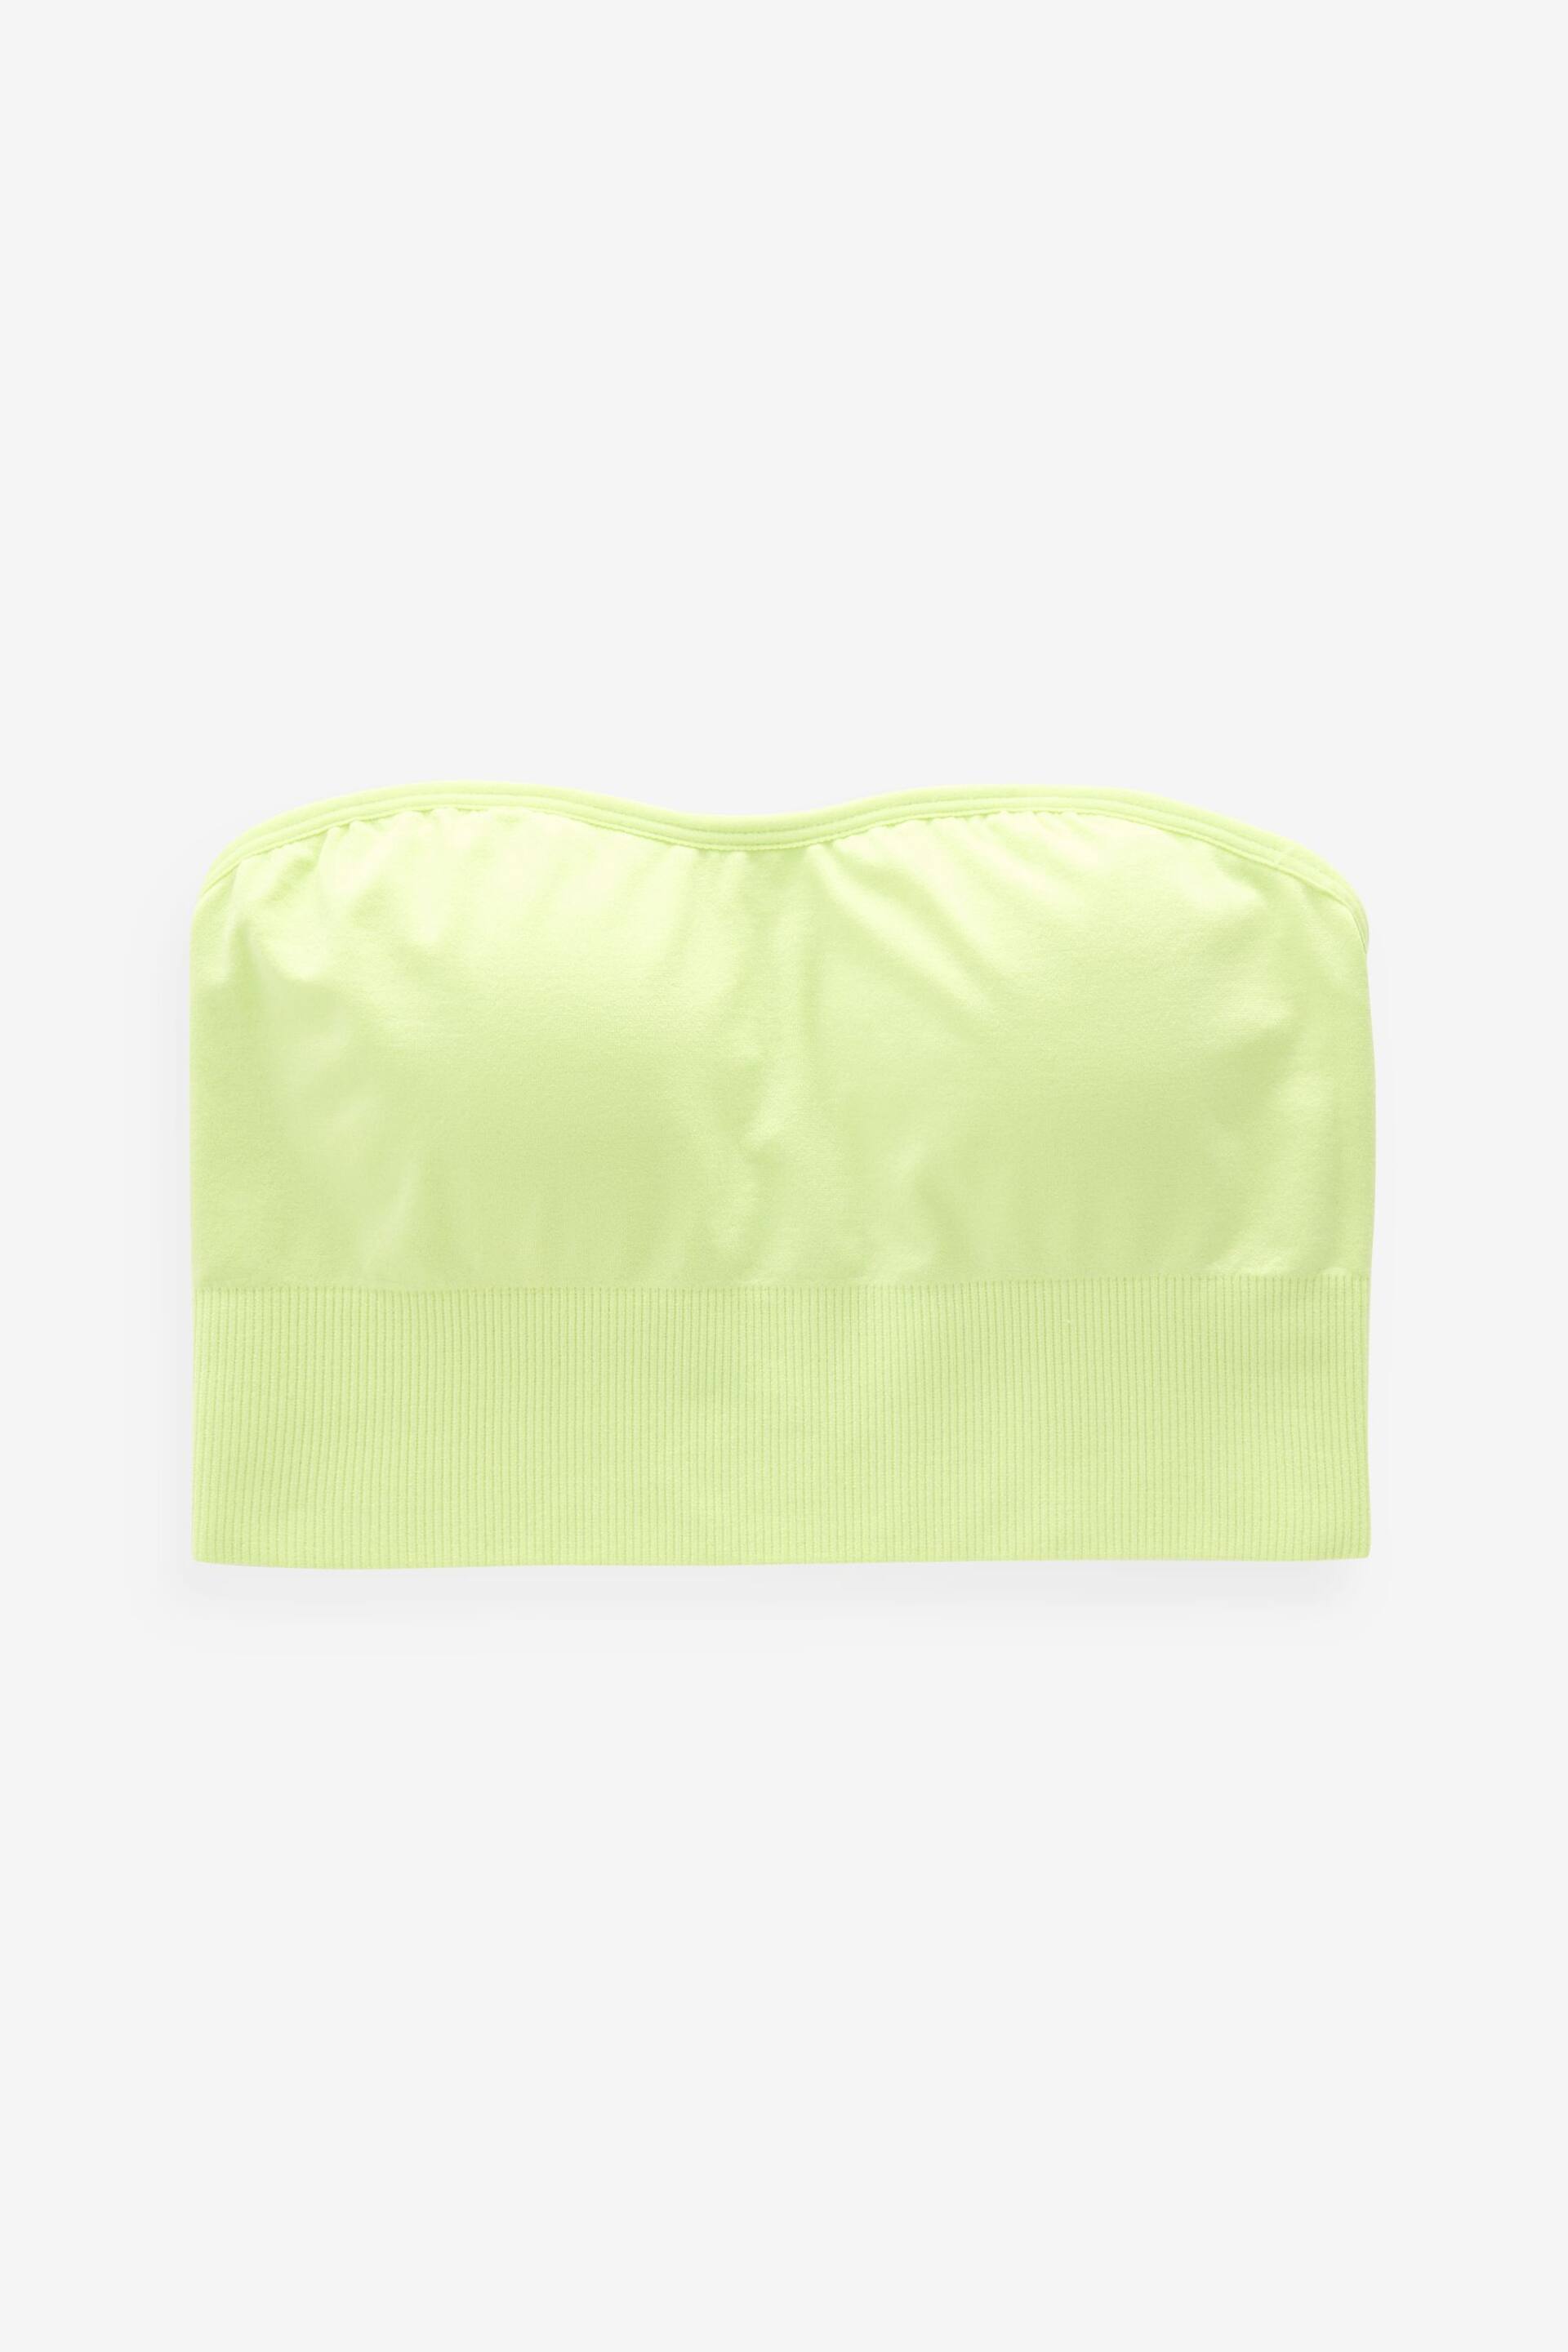 White/Lime Green Seamfree Bandeau Bras 2 Pack - Image 9 of 10